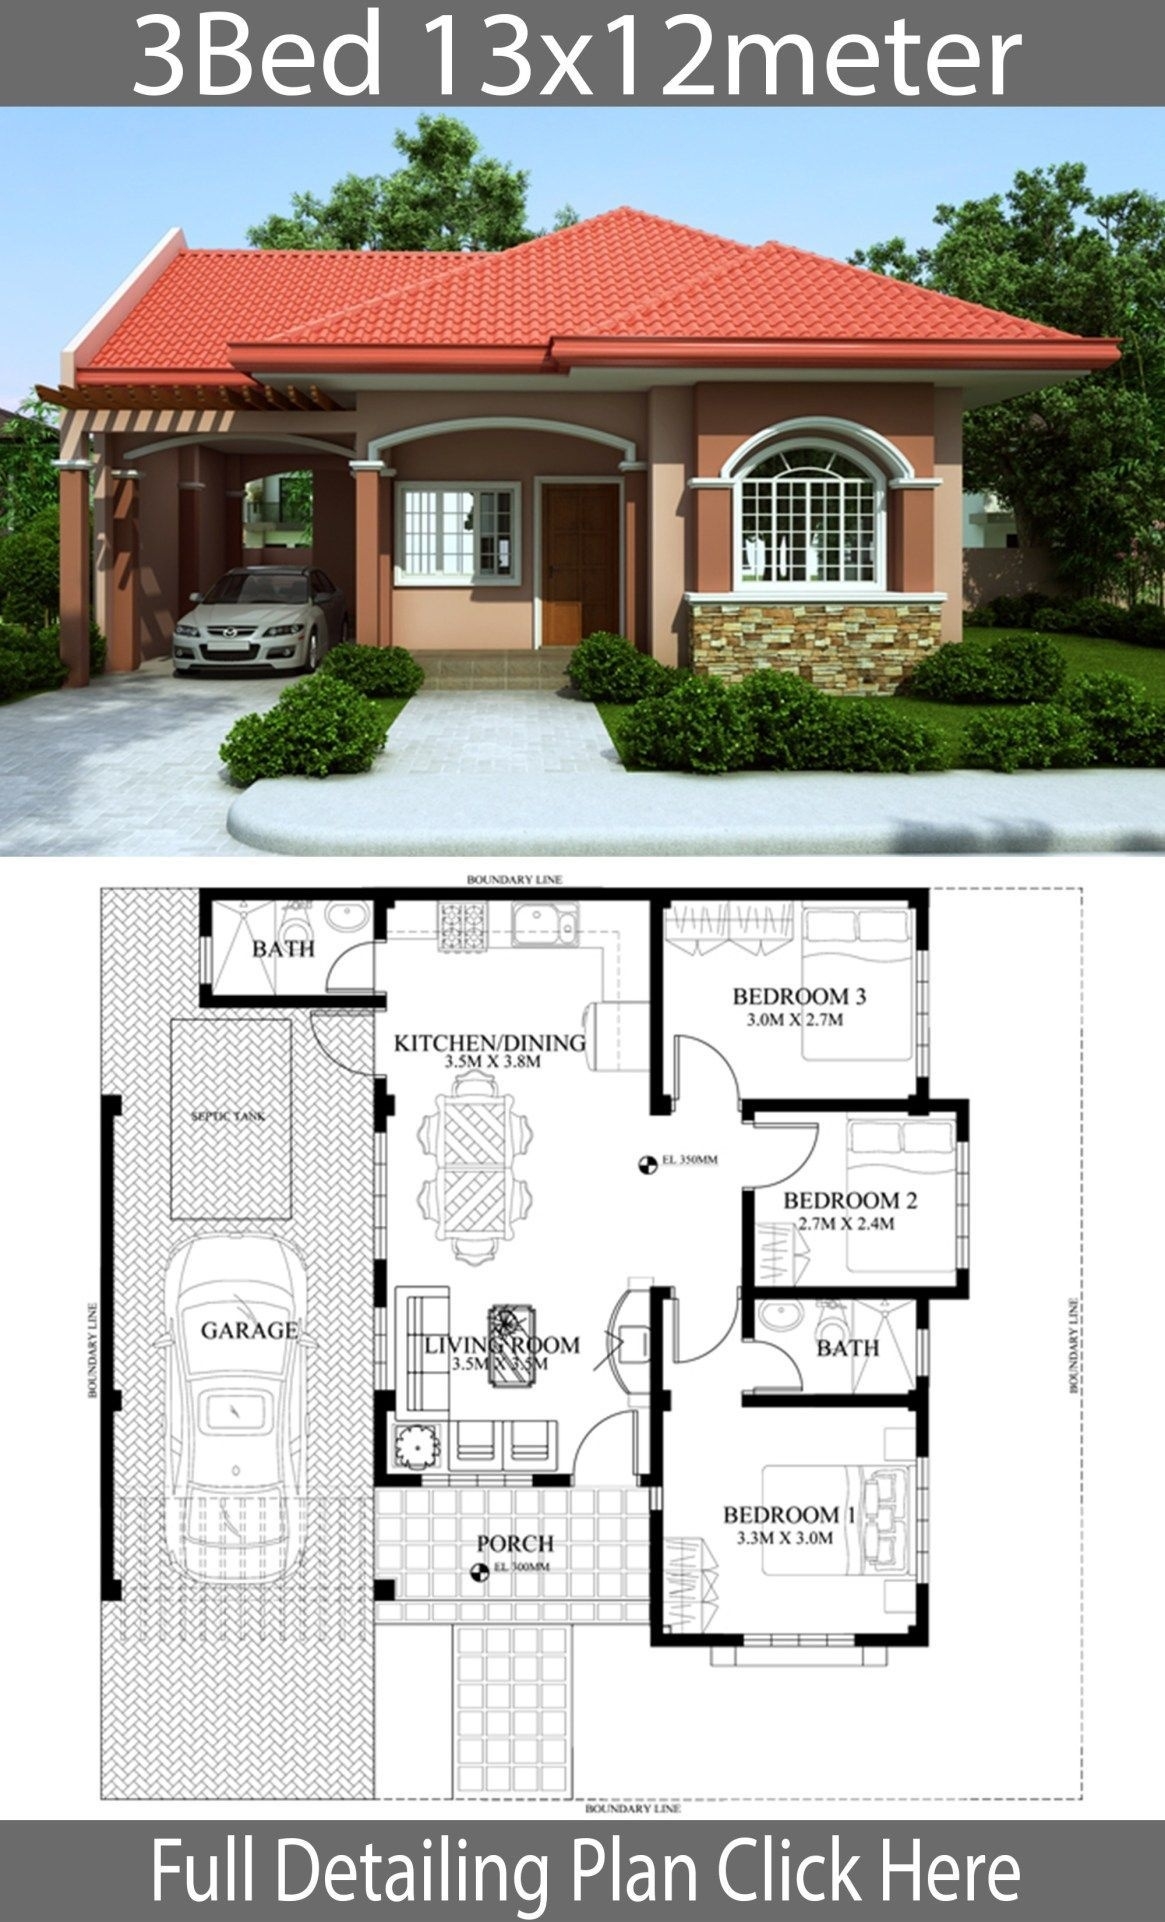 Mesmerizing home design plan 13x12m with 3 bedrooms #hausdesign home design plan intended for splendid 3 bedroom house plans free 3d